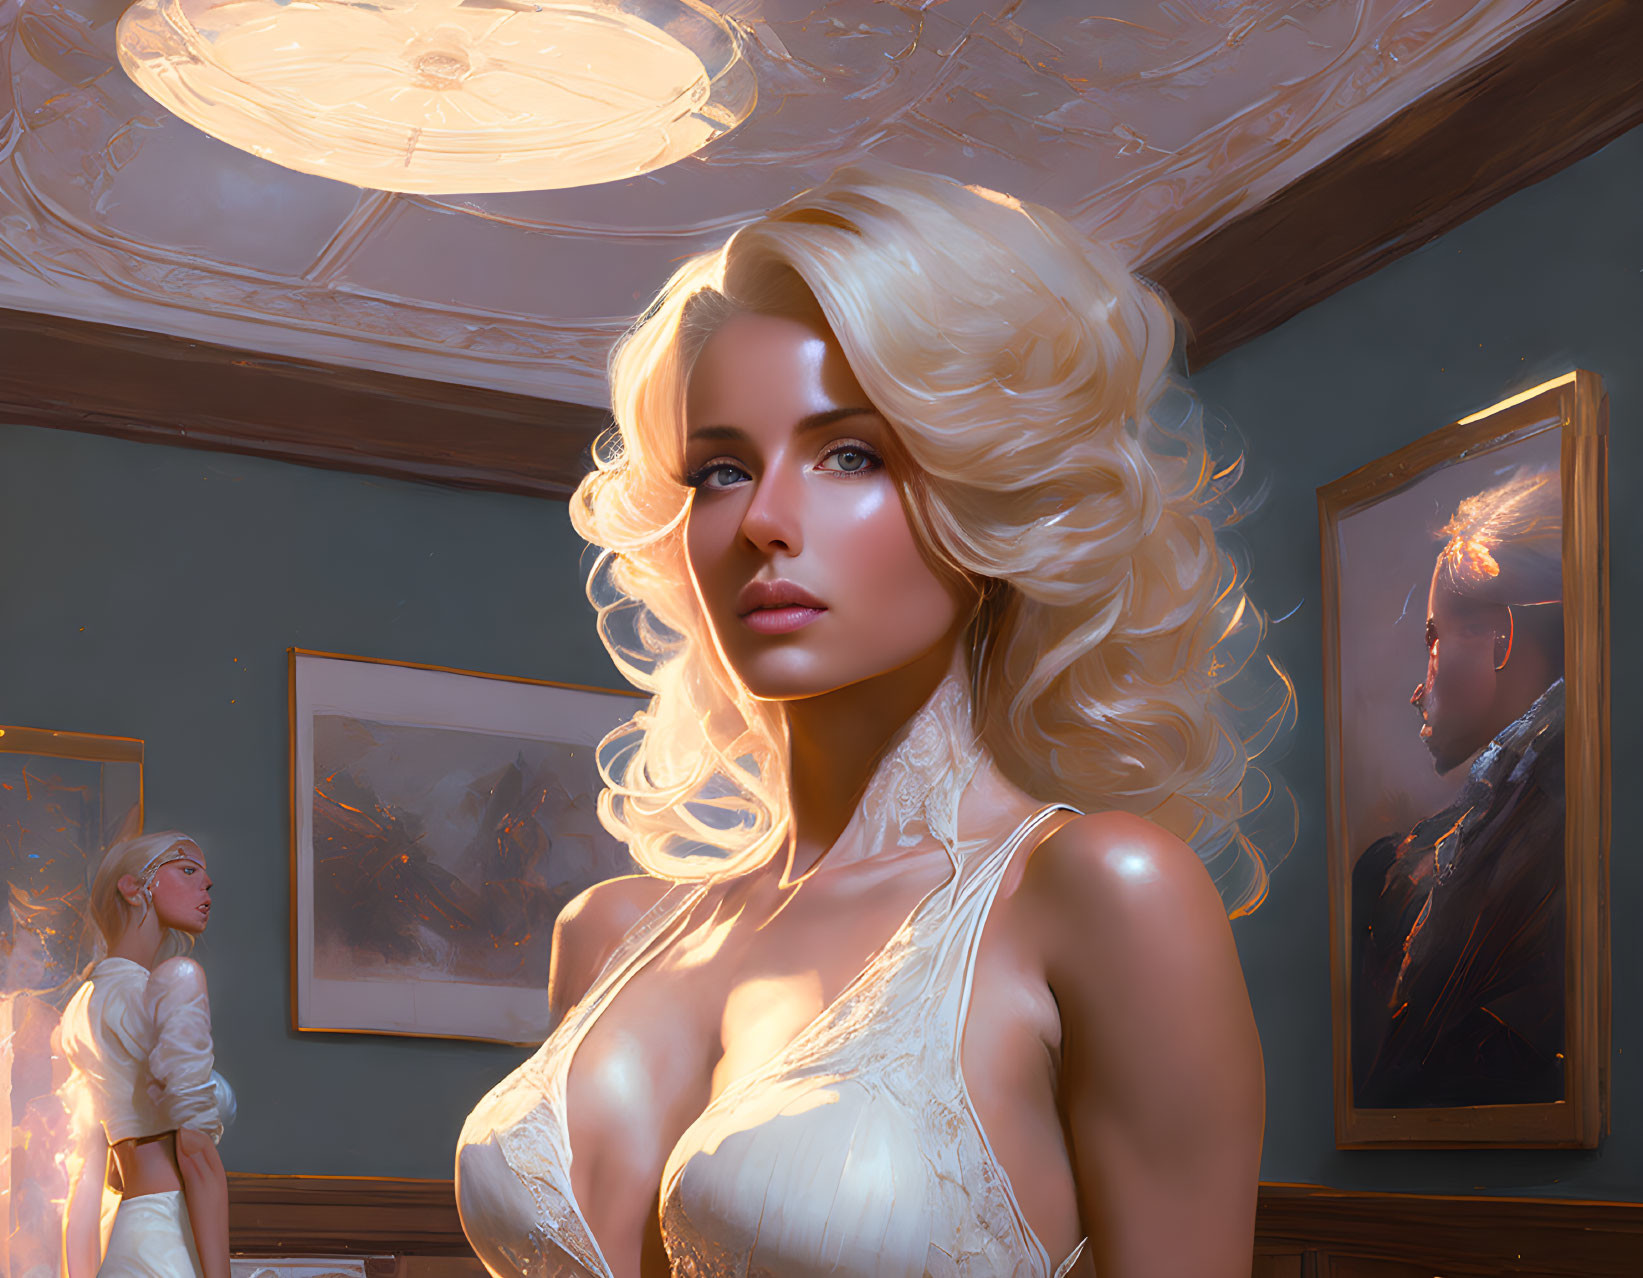 Blonde woman in white dress in opulent room with portraits